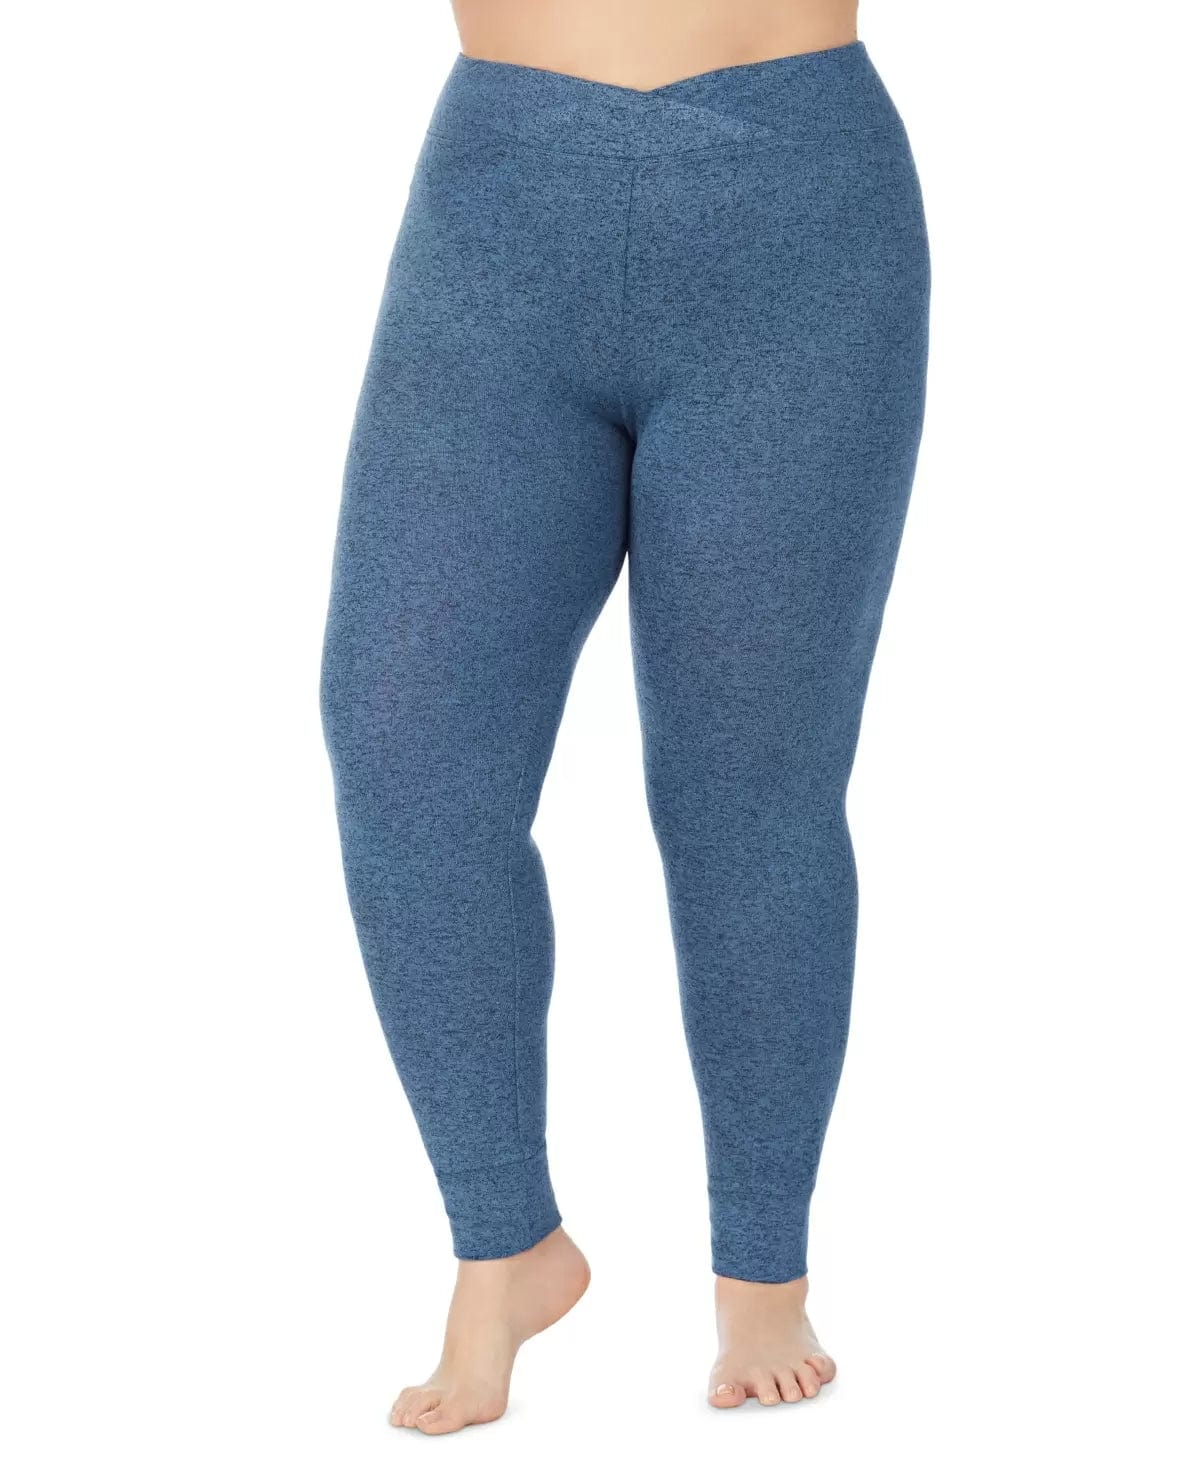 Cuddl Duds Women's Fleecewear with Stretch Legging, Charcoal, Small at   Women's Clothing store